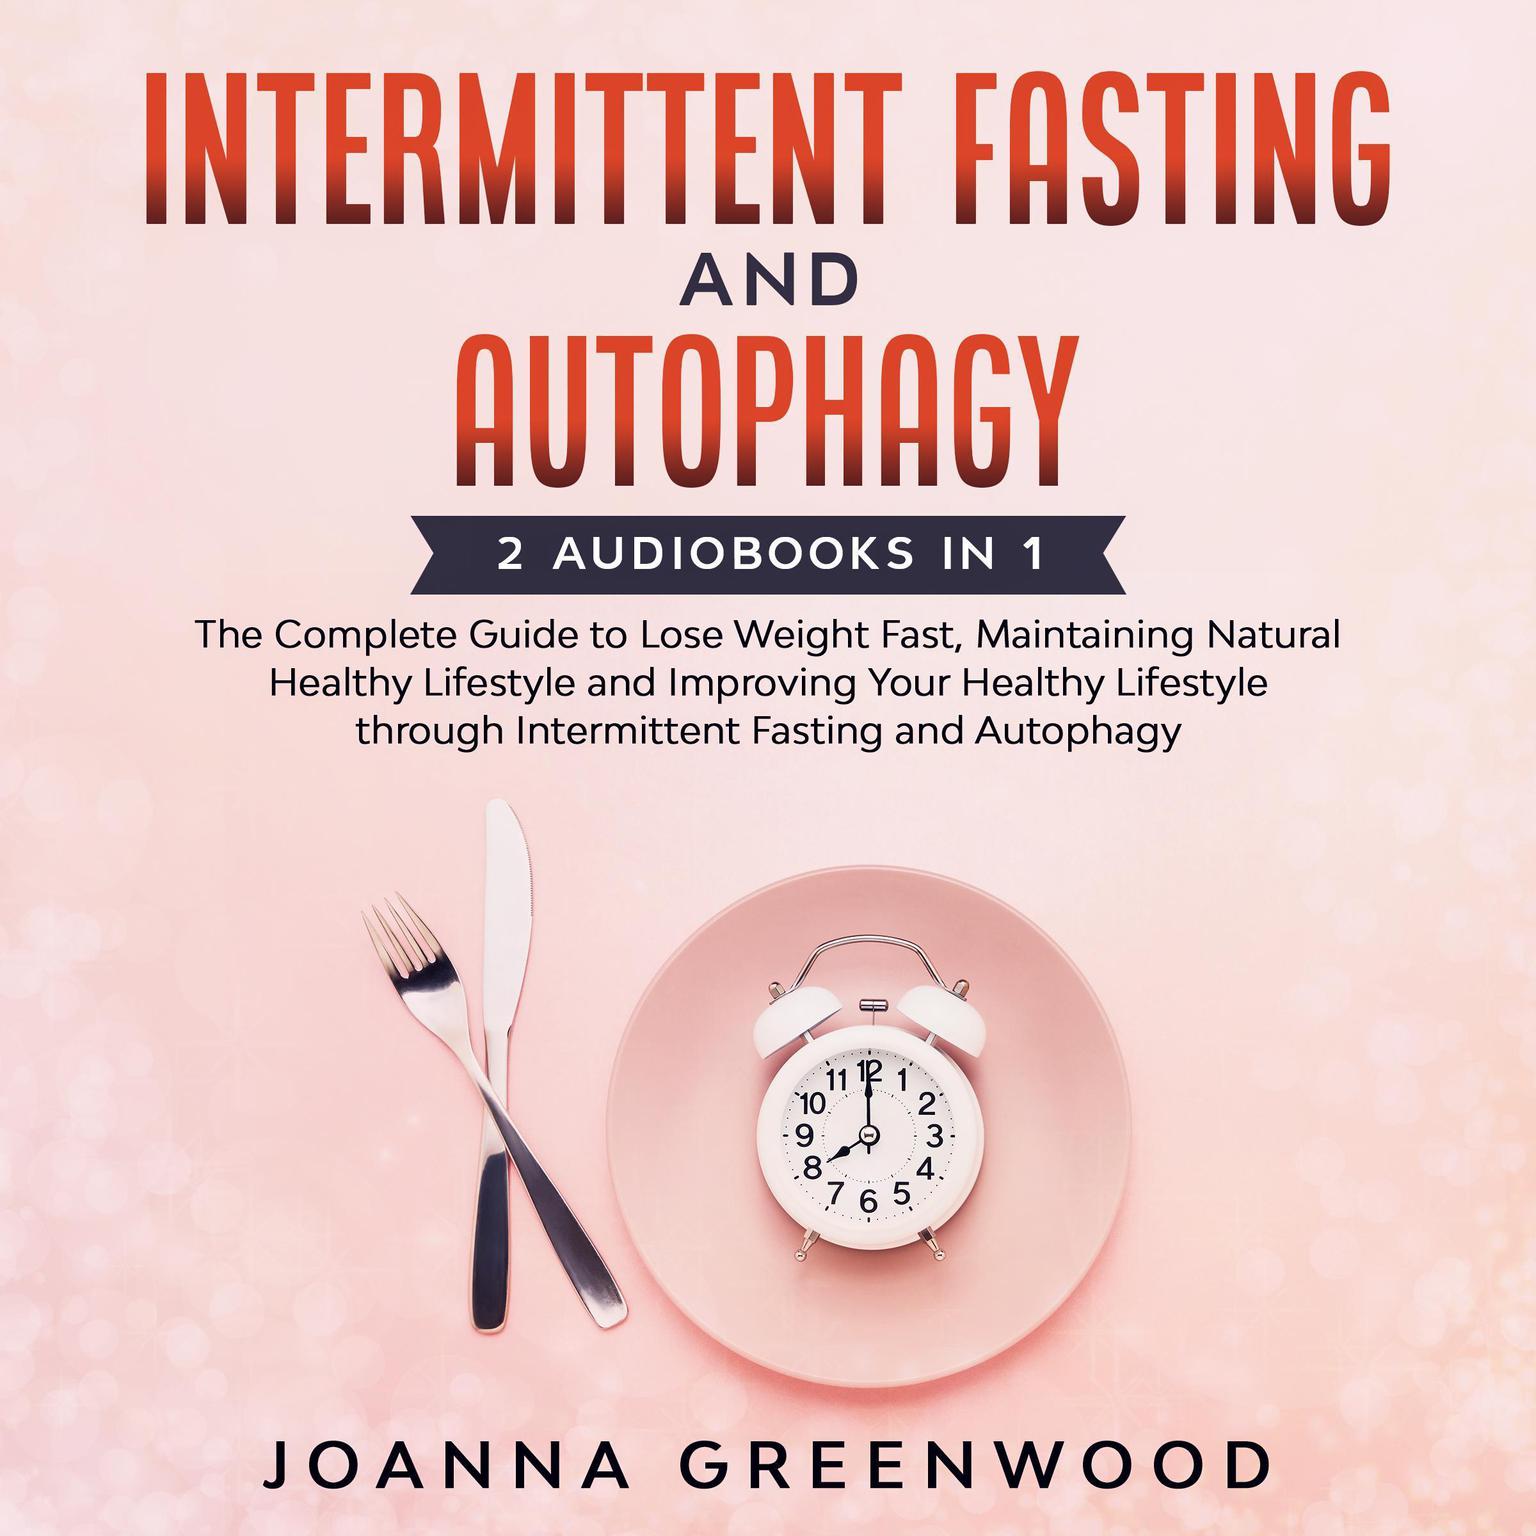 Intermittent Fasting and Autophagy: 2 Audiobooks in 1 - The Complete Guide to Lose Weight Fast, Maintaining Natural Healthy Lifestyle and Improving Your Healthy Lifestyle through Intermittent Fasting and Autophagy Audiobook, by Joanna Greenwood